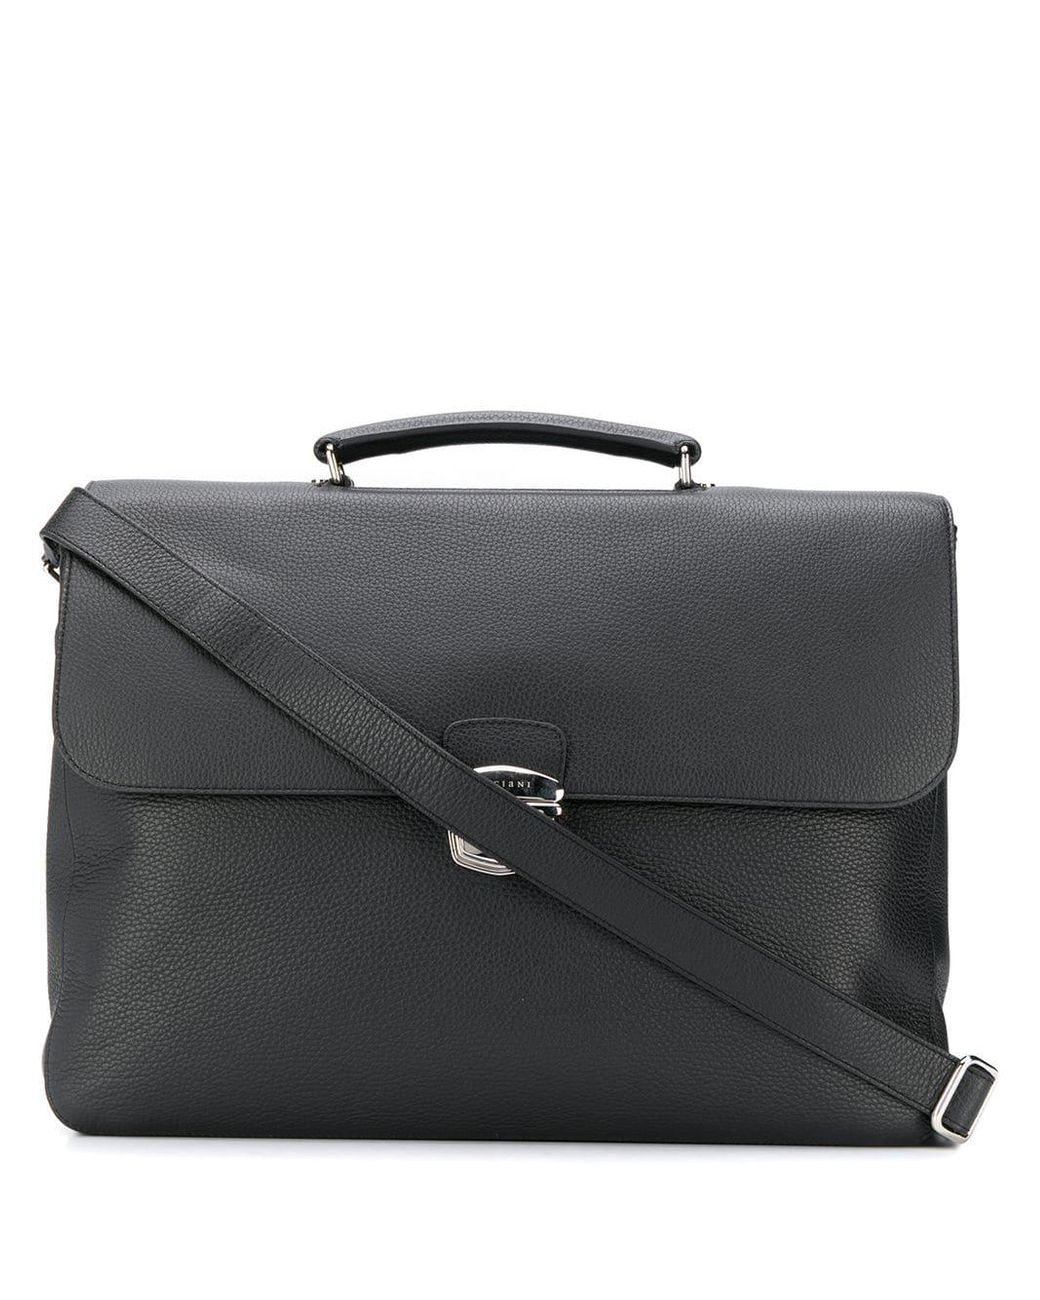 Orciani Leather Foldover Top Large Briefcase in Black for Men - Lyst